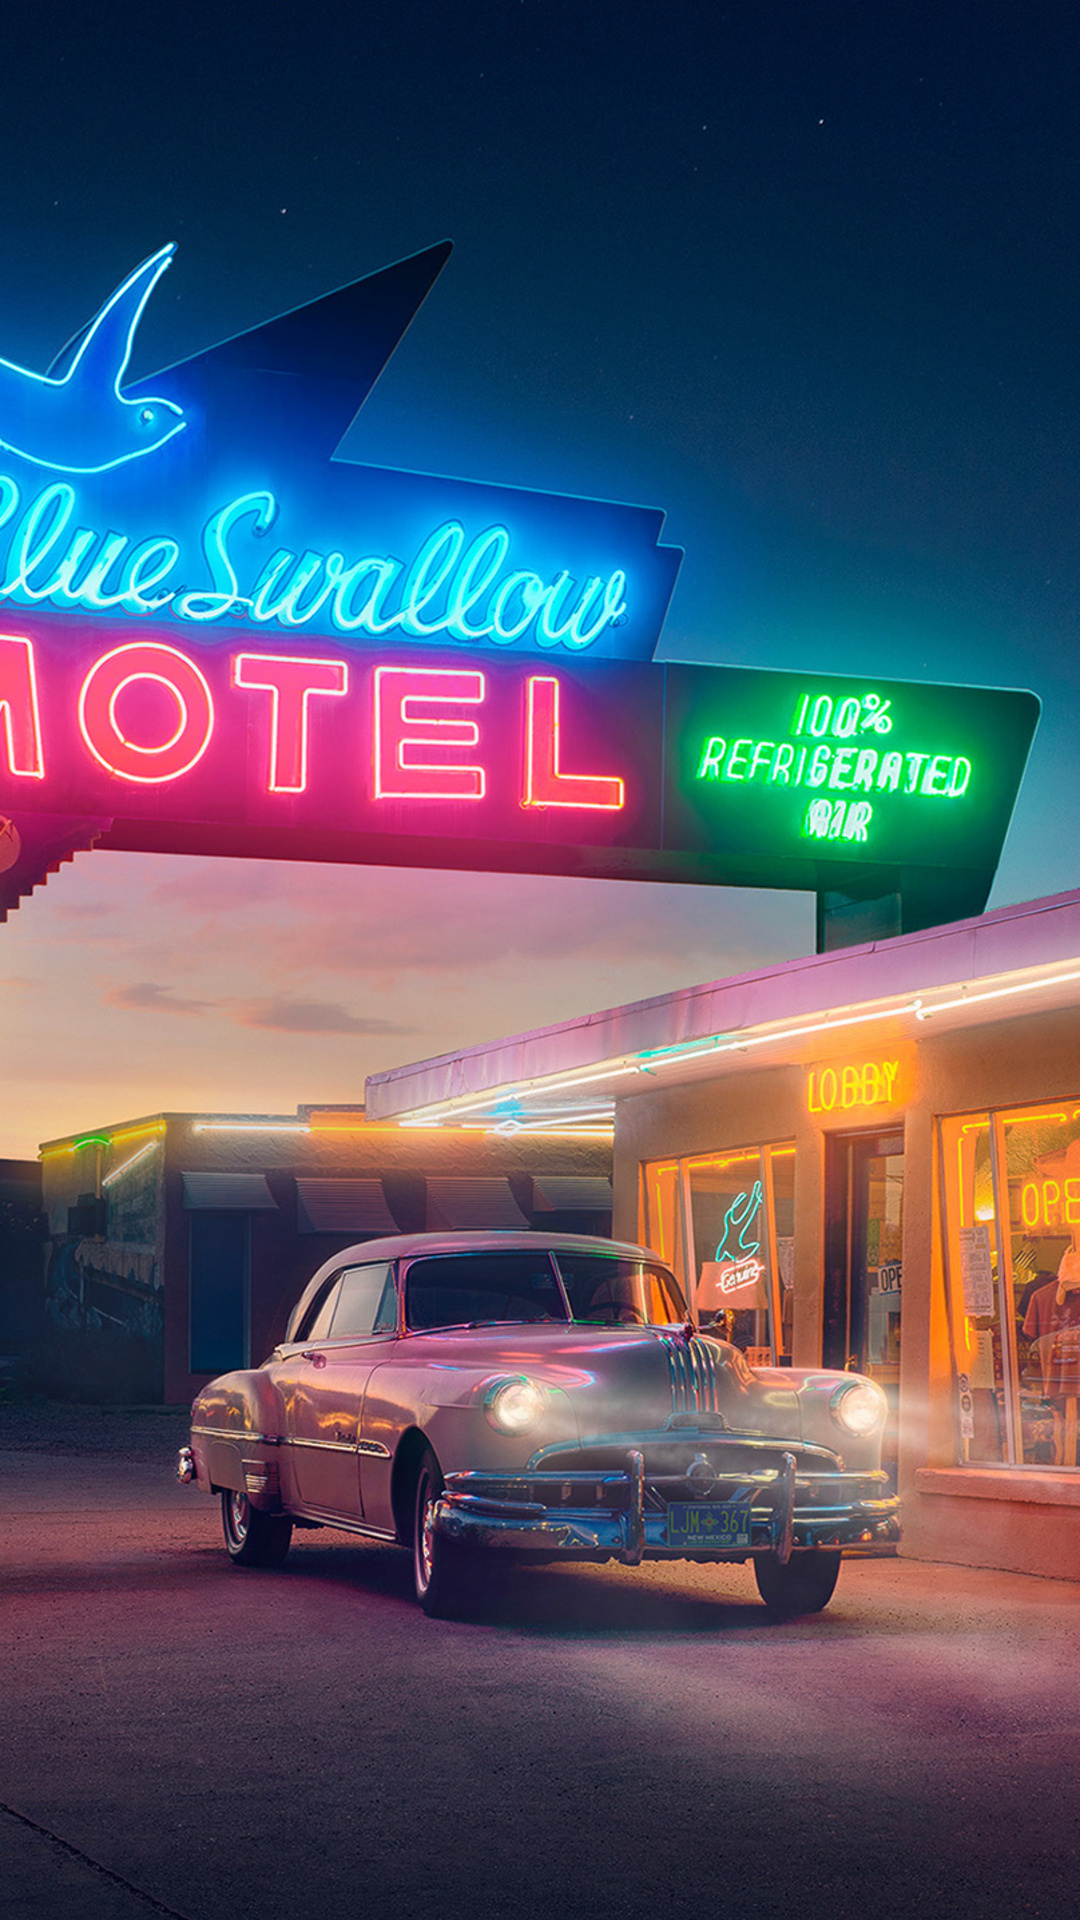 A vintage car parked in front of a neon motel sign at night. - 50s